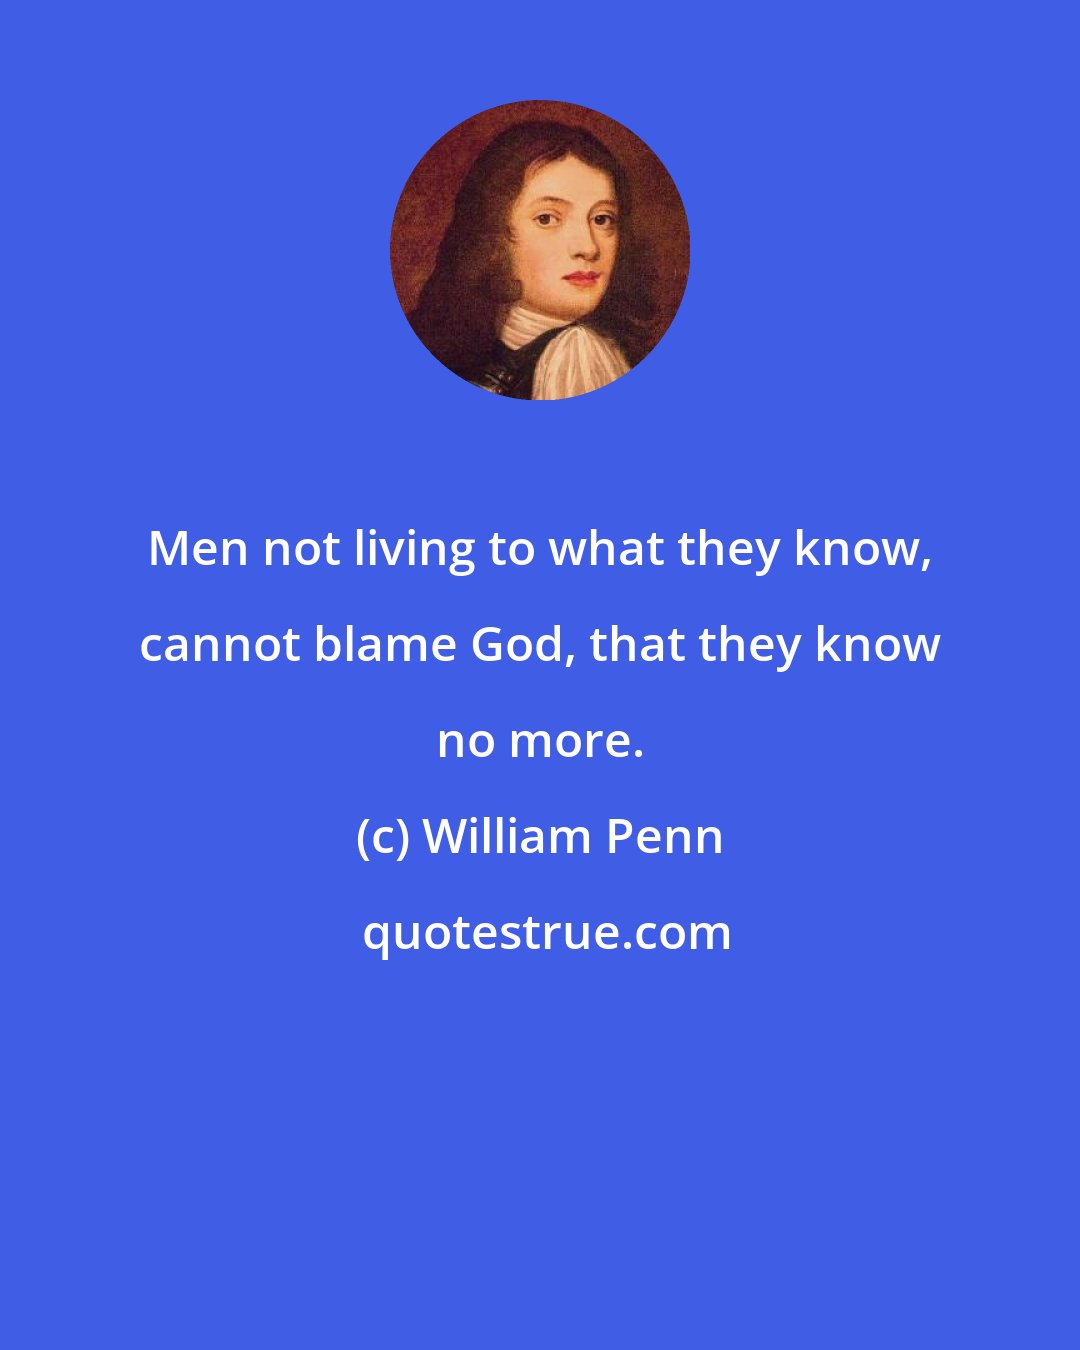 William Penn: Men not living to what they know, cannot blame God, that they know no more.